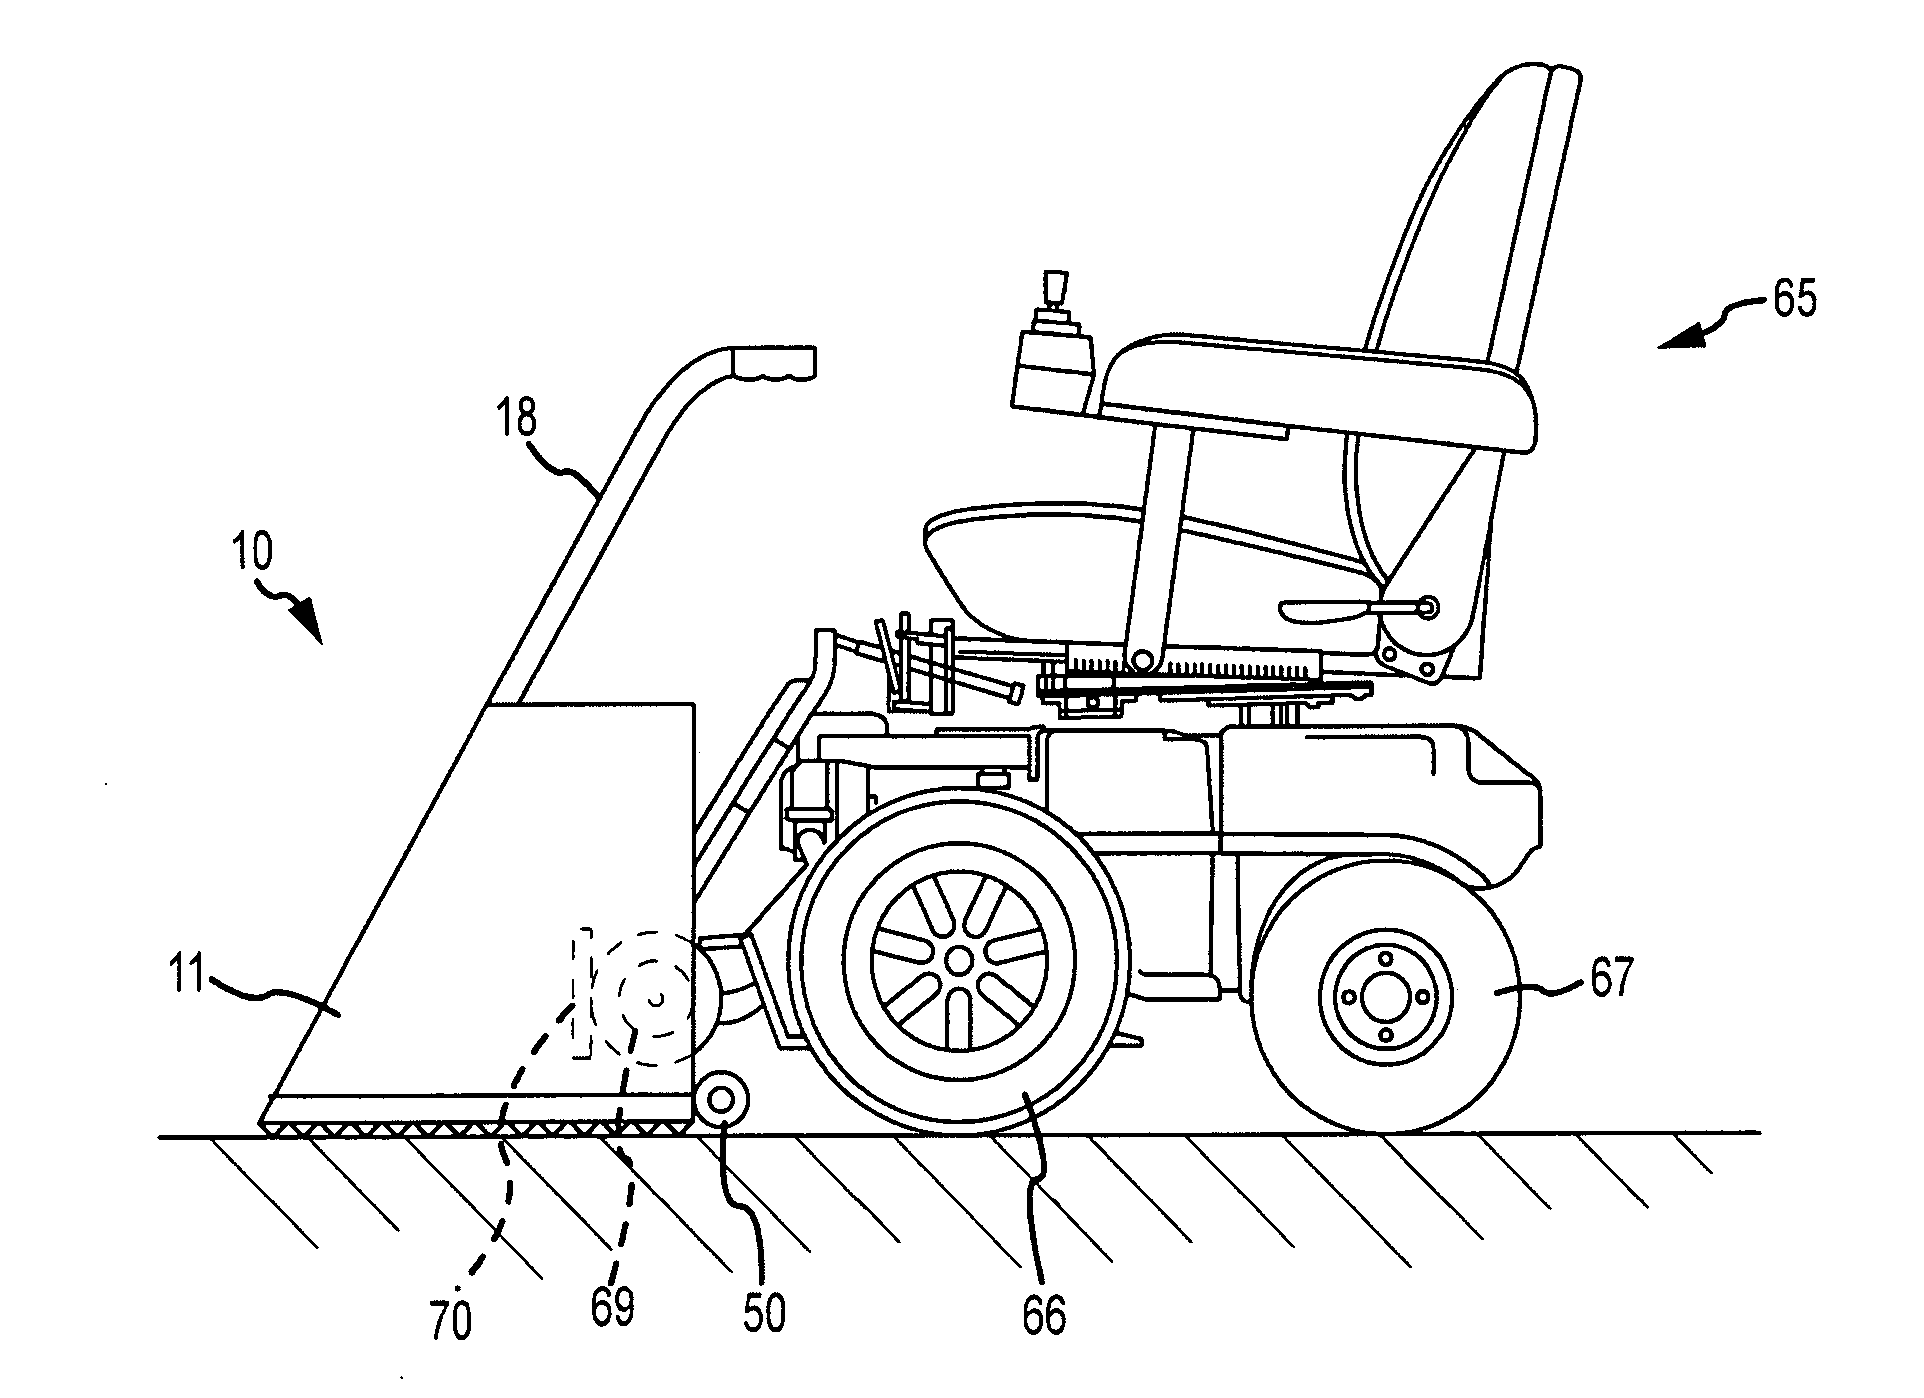 Snowplow for use with a motorized wheelchair